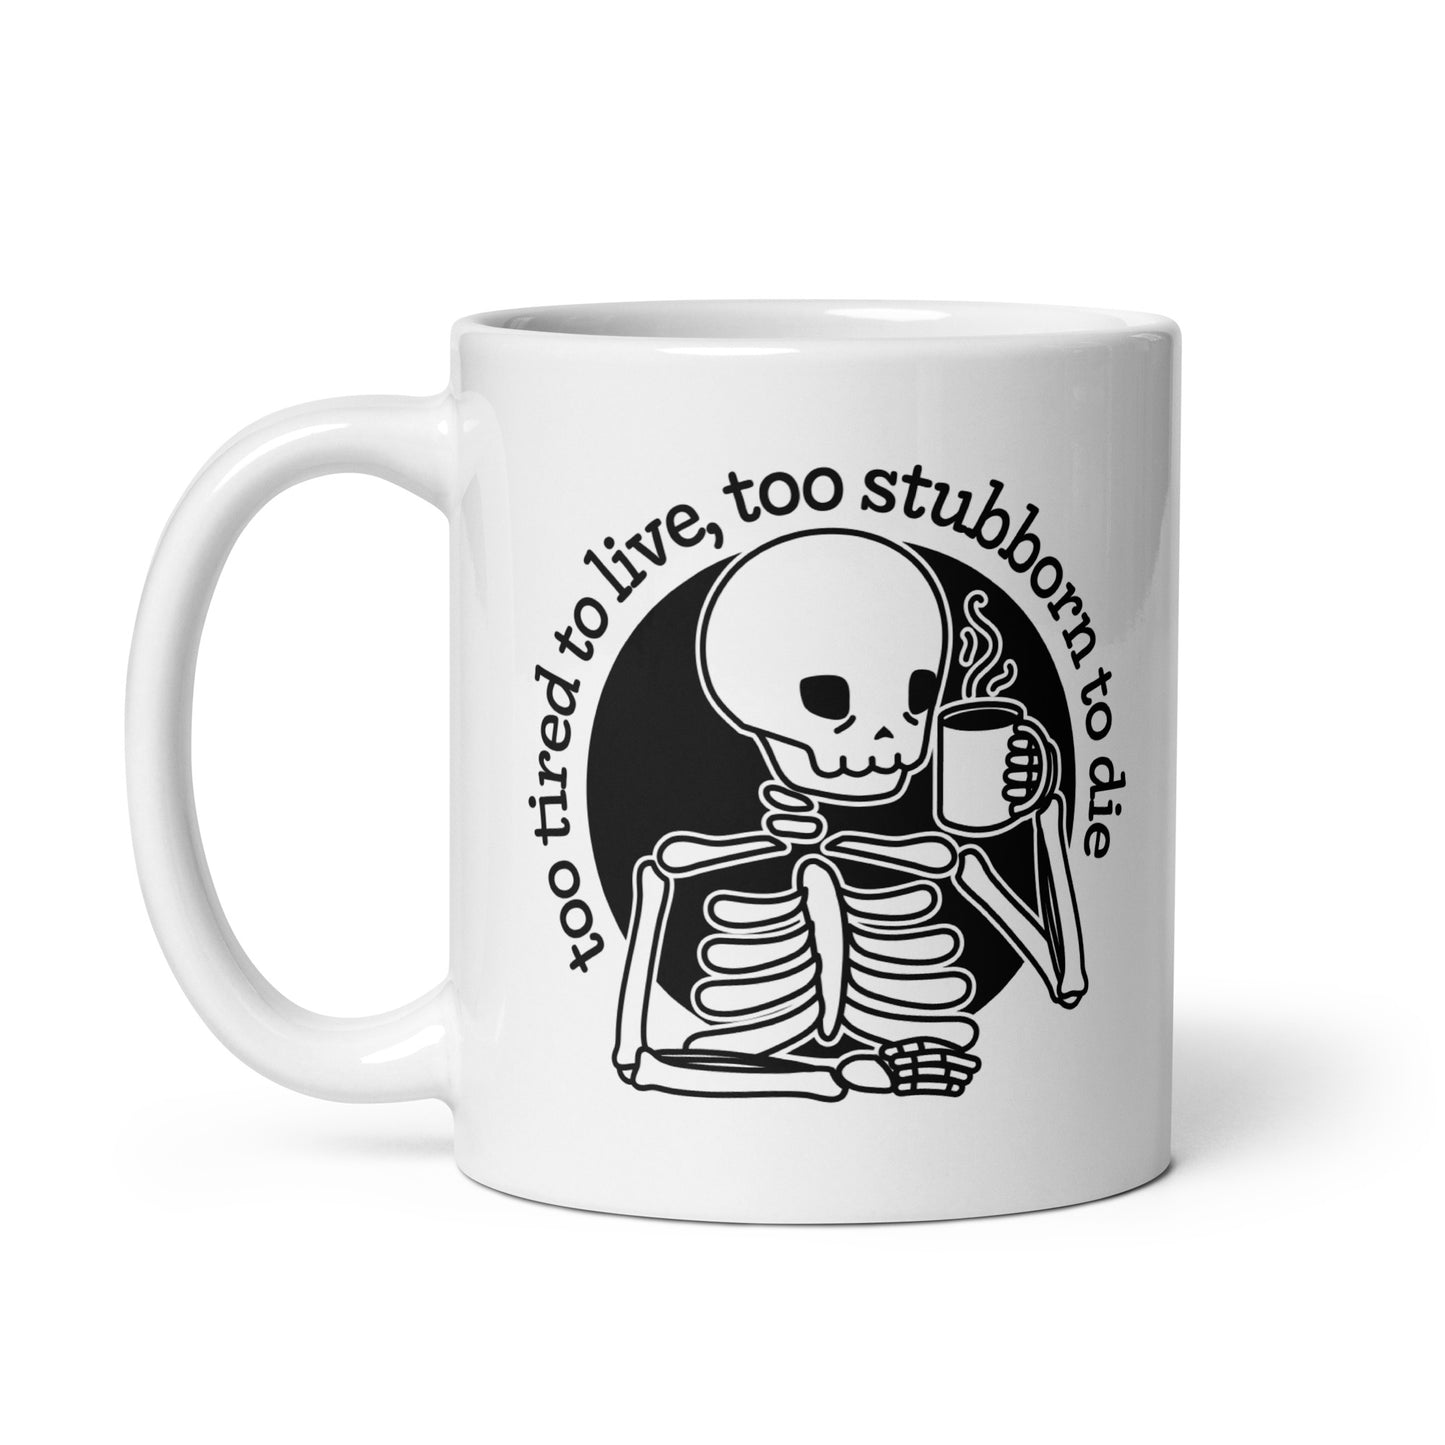 A white 11 ounce ceramic mug featuring a tired-looking skeleton holding a steaming mug. Text above the skeleton reads "too tired to live, too stubborn to die".